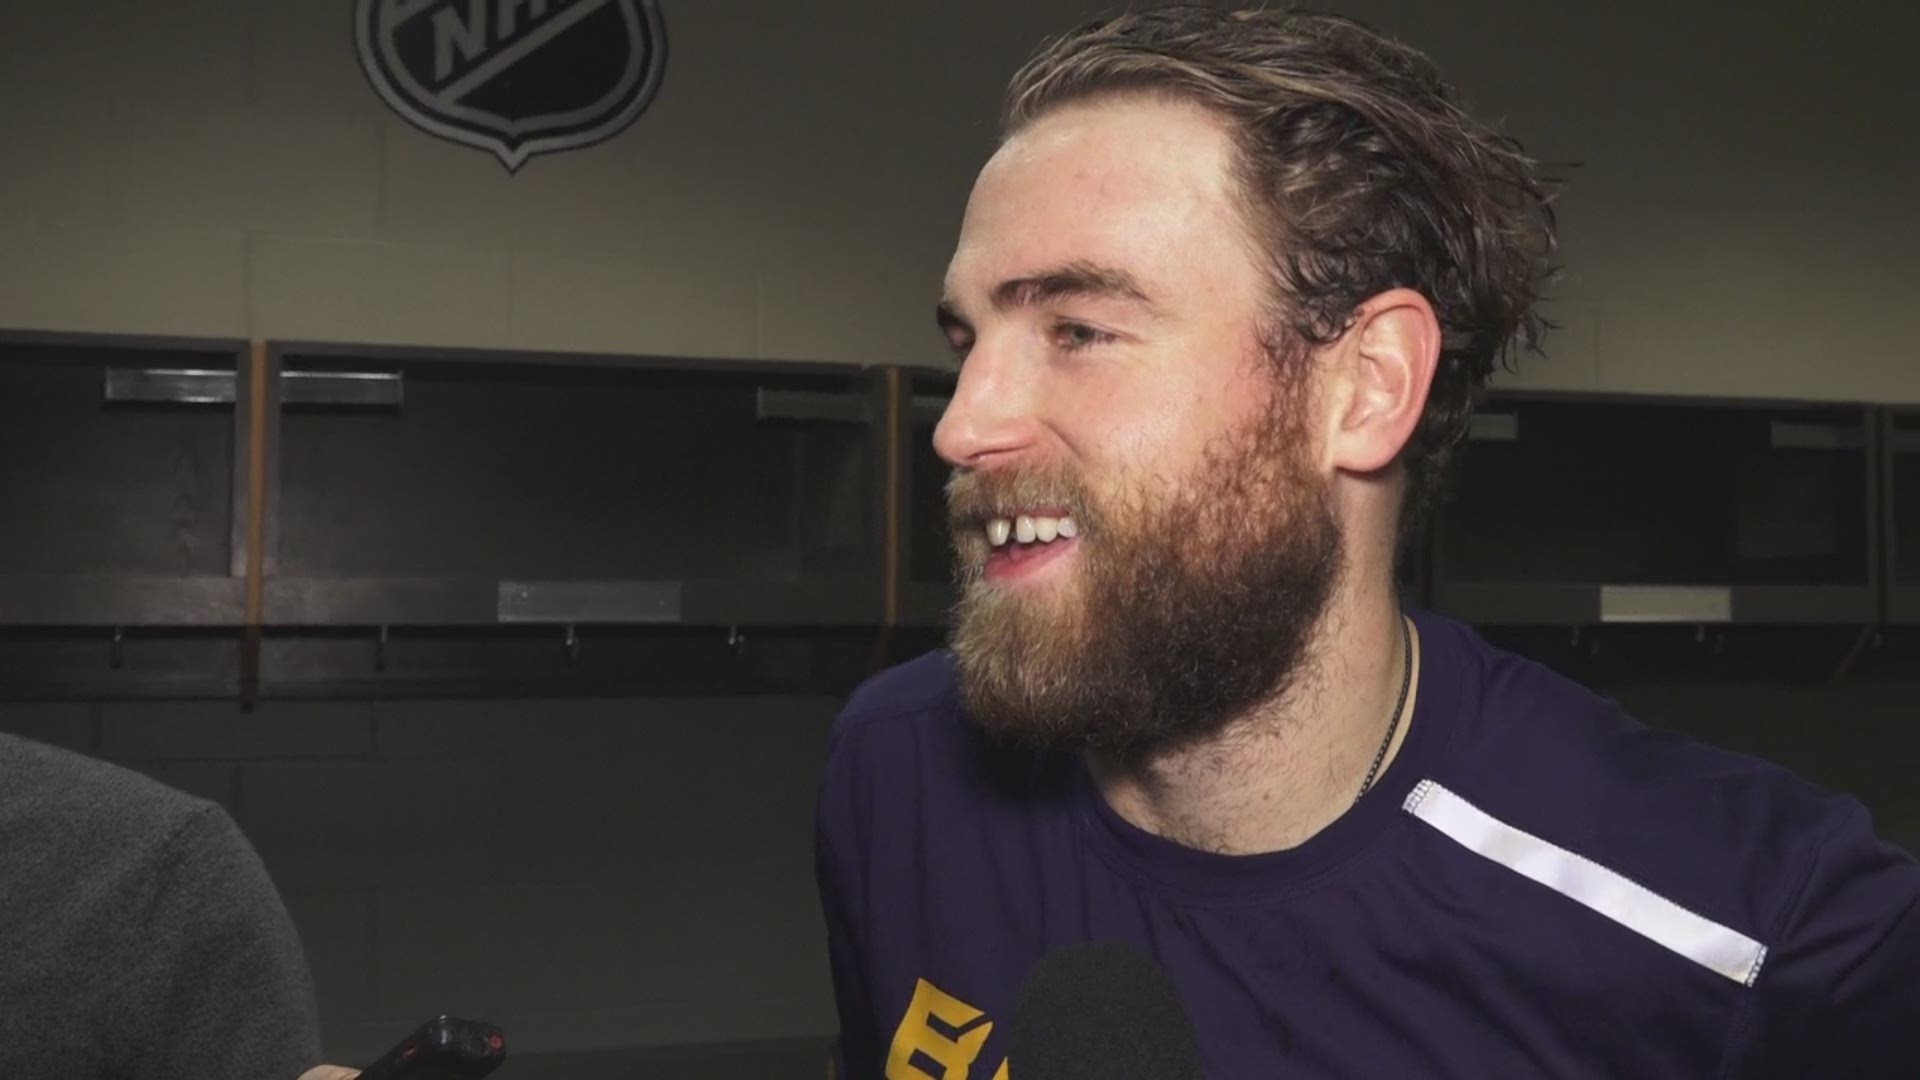 Ryan O’Reilly talks after the Blues get their second OT win in a row, beating the Minnesota Wild 4-3 Saturday. Video courtesy: St. Louis Blues